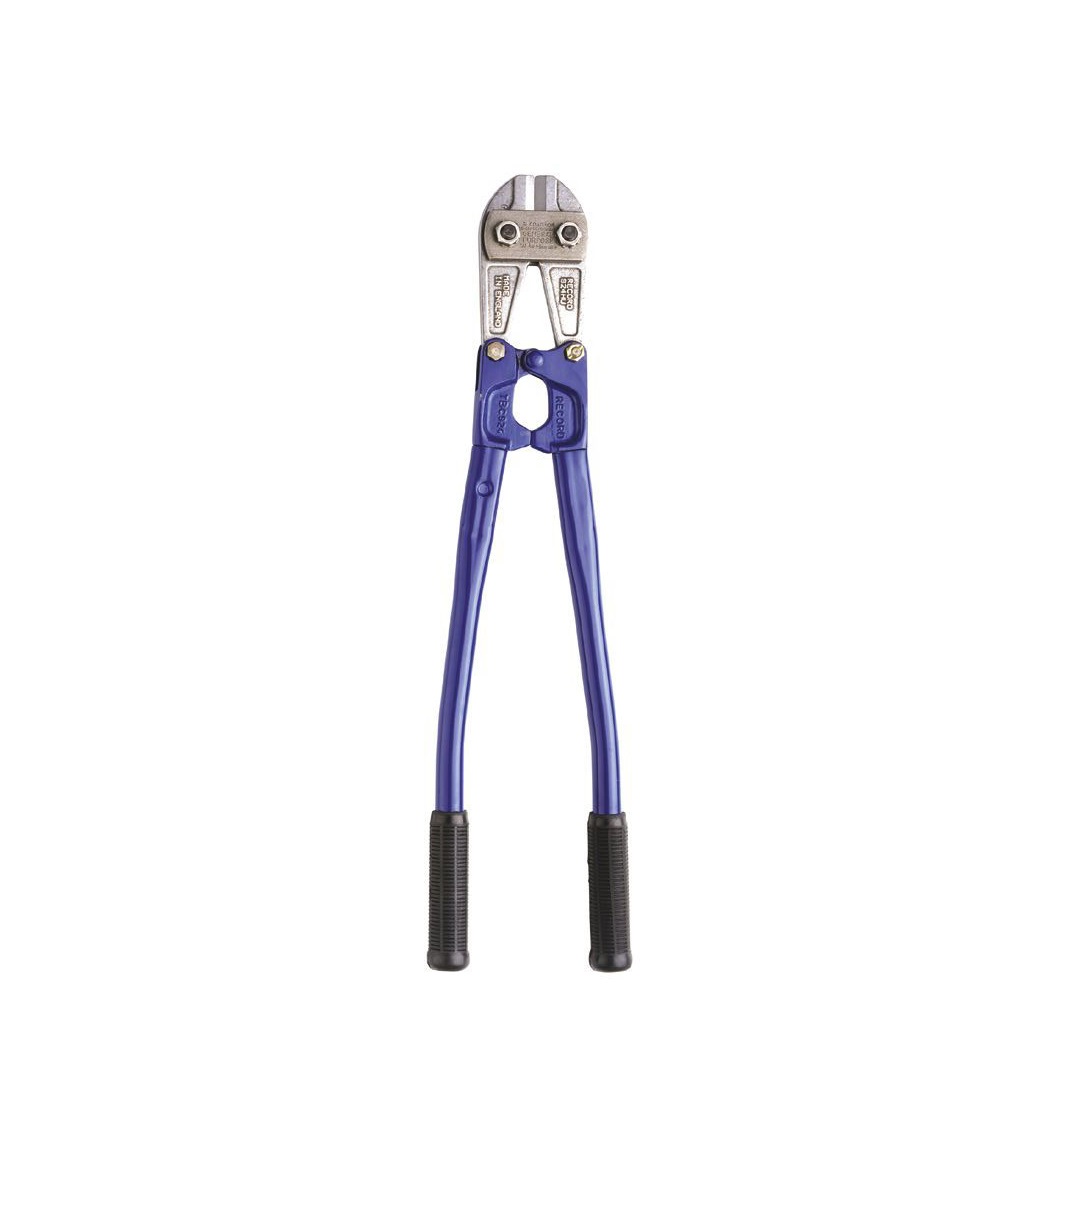 Irwin Record REC936H 936H Arm Adjusted High Tensile Bolt Cutter